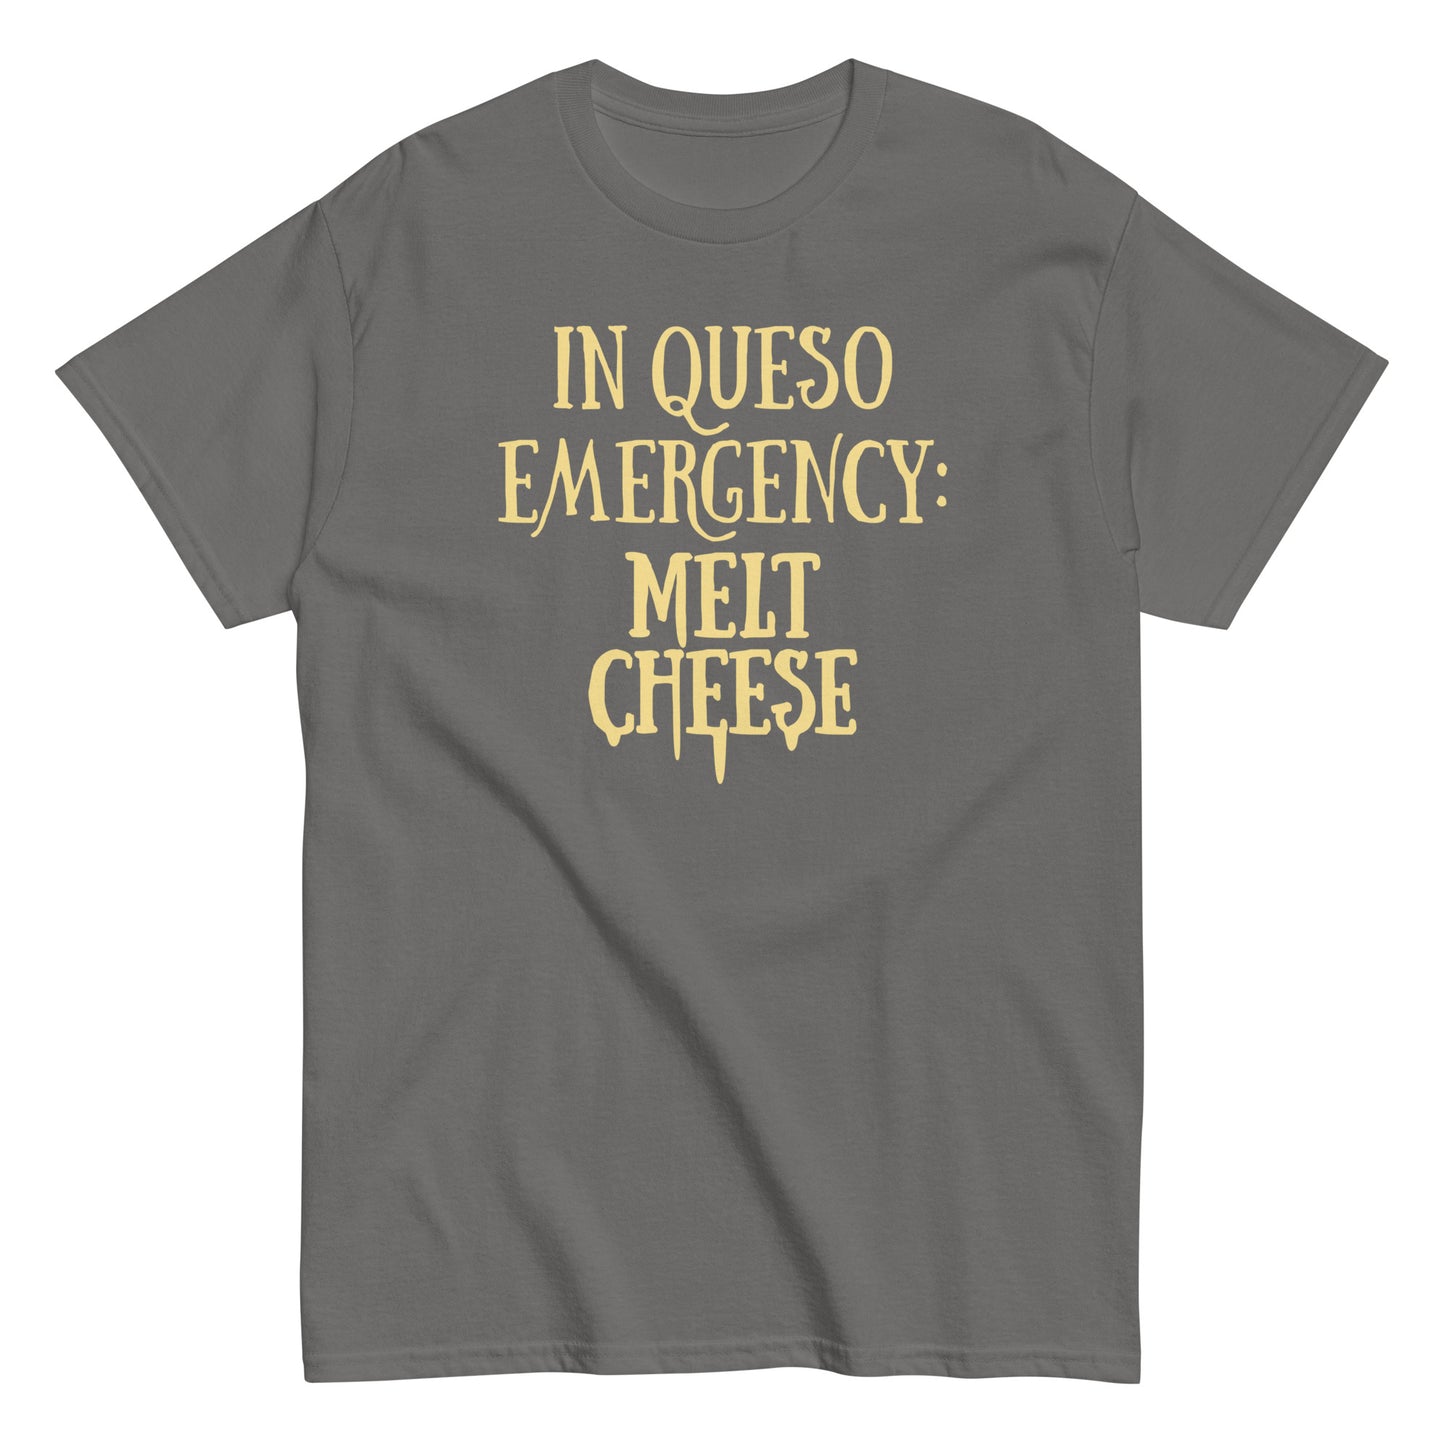 In Queso Emergency: Melt Cheese Men's Classic Tee